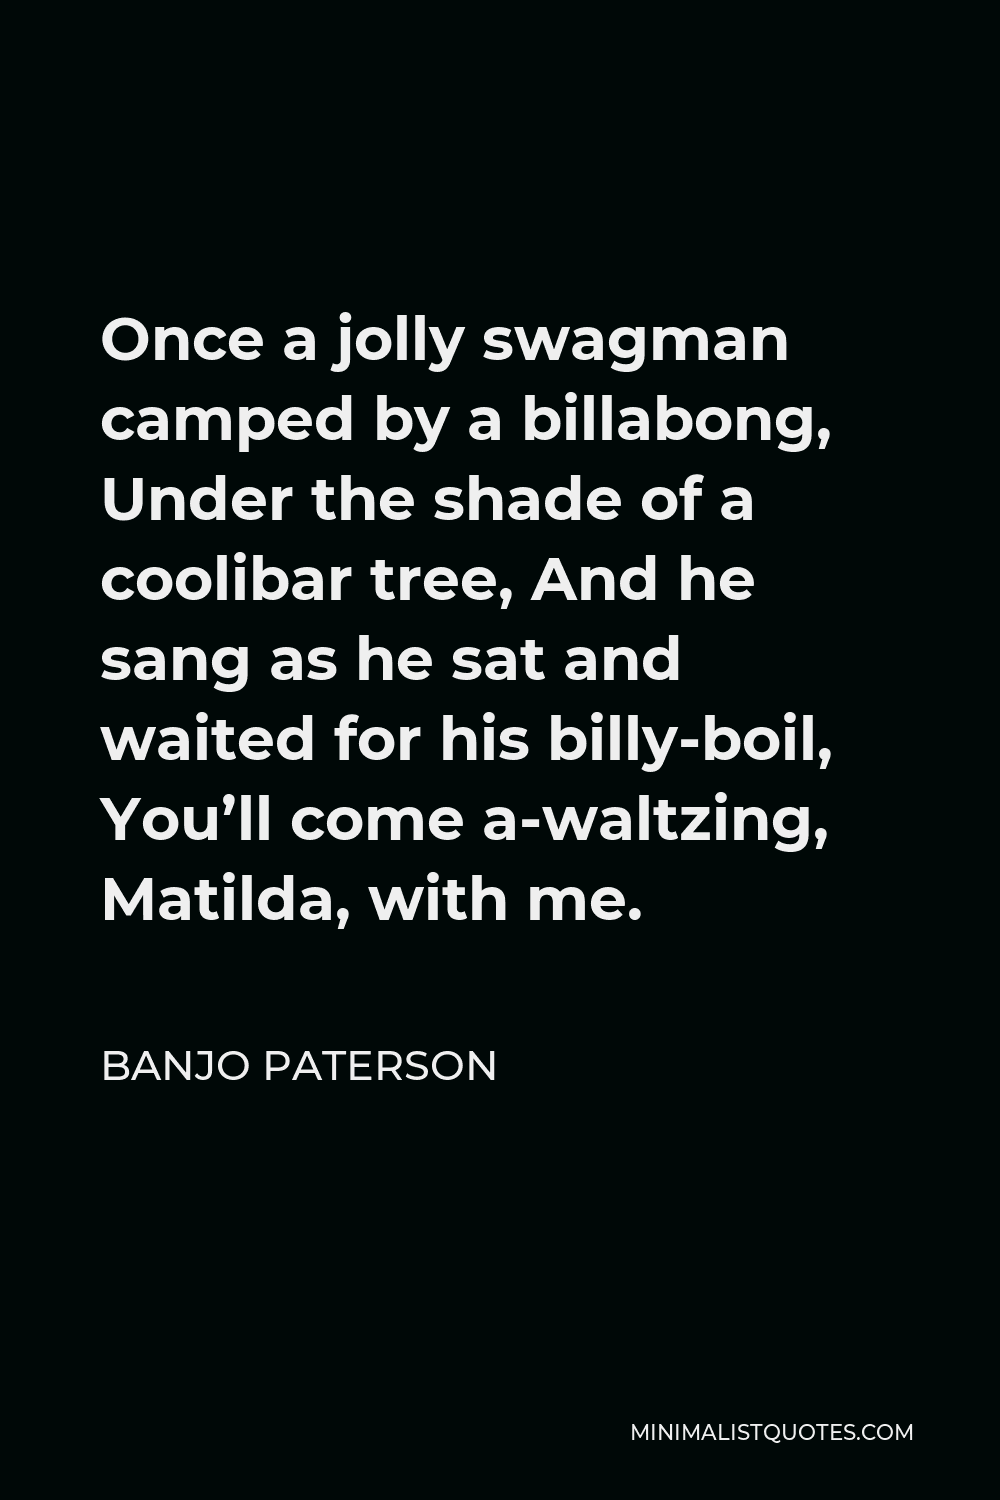 Banjo Paterson Quote - Once a jolly swagman camped by a billabong, Under the shade of a coolibar tree, And he sang as he sat and waited for his billy-boil, You’ll come a-waltzing, Matilda, with me.